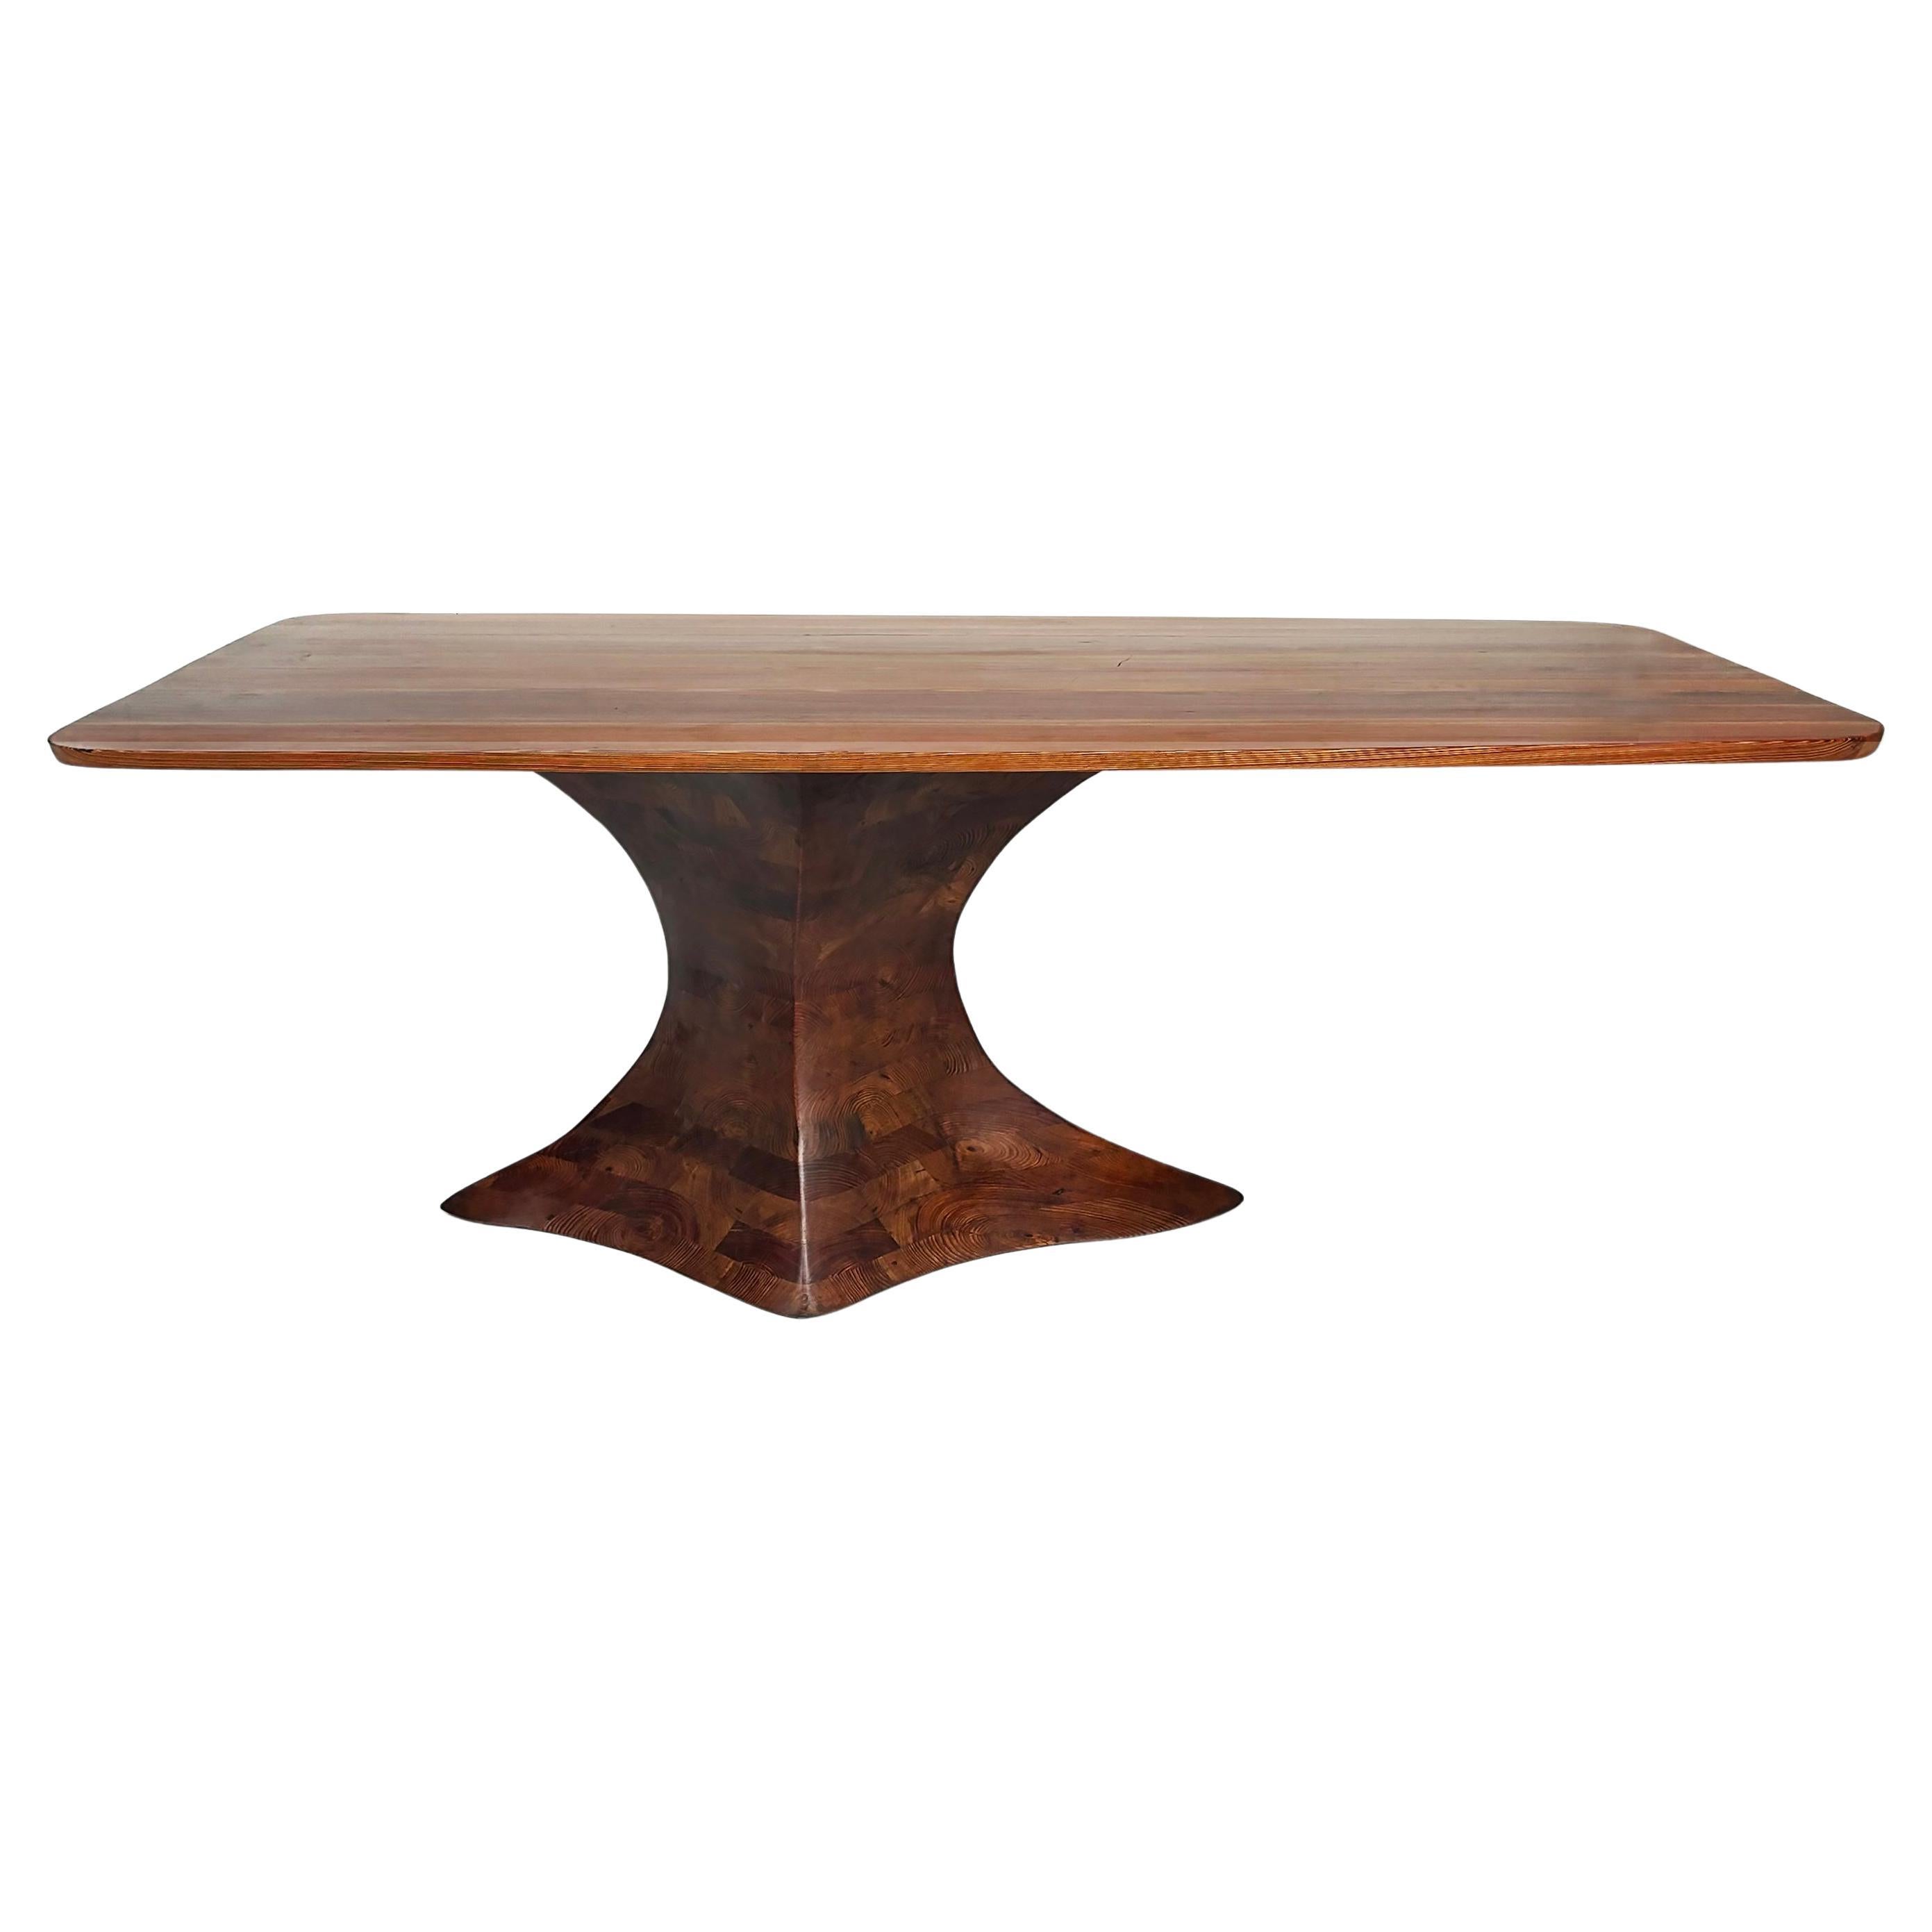 Iade County Pine Sculptural Studio Dining Table, Ray Pirello Woodworking 